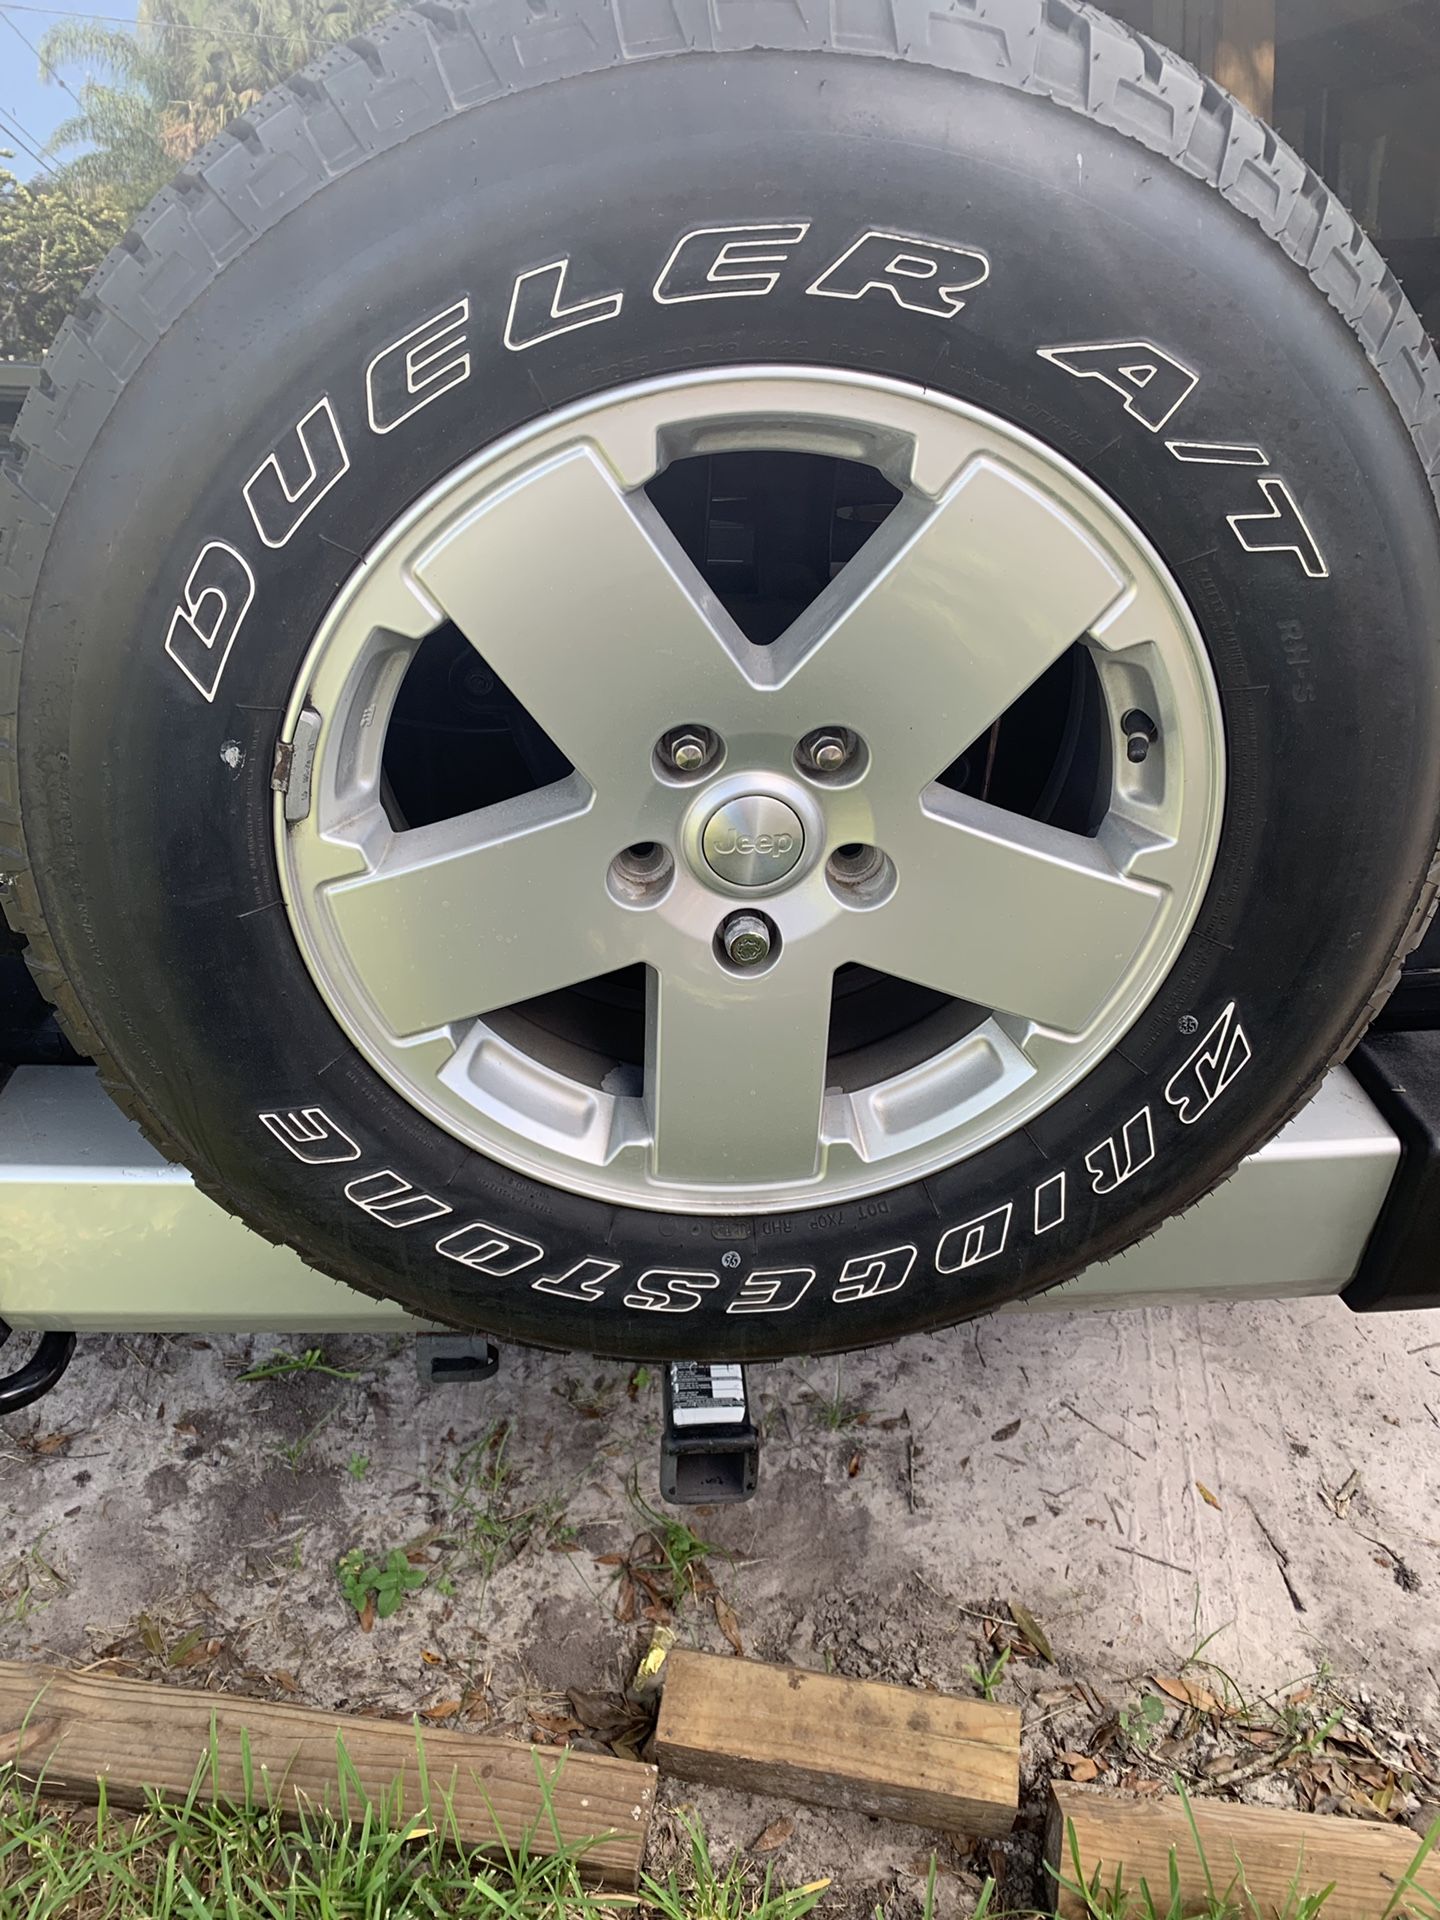 5 stock / 2012 Jeep Wrangler wheels and tires